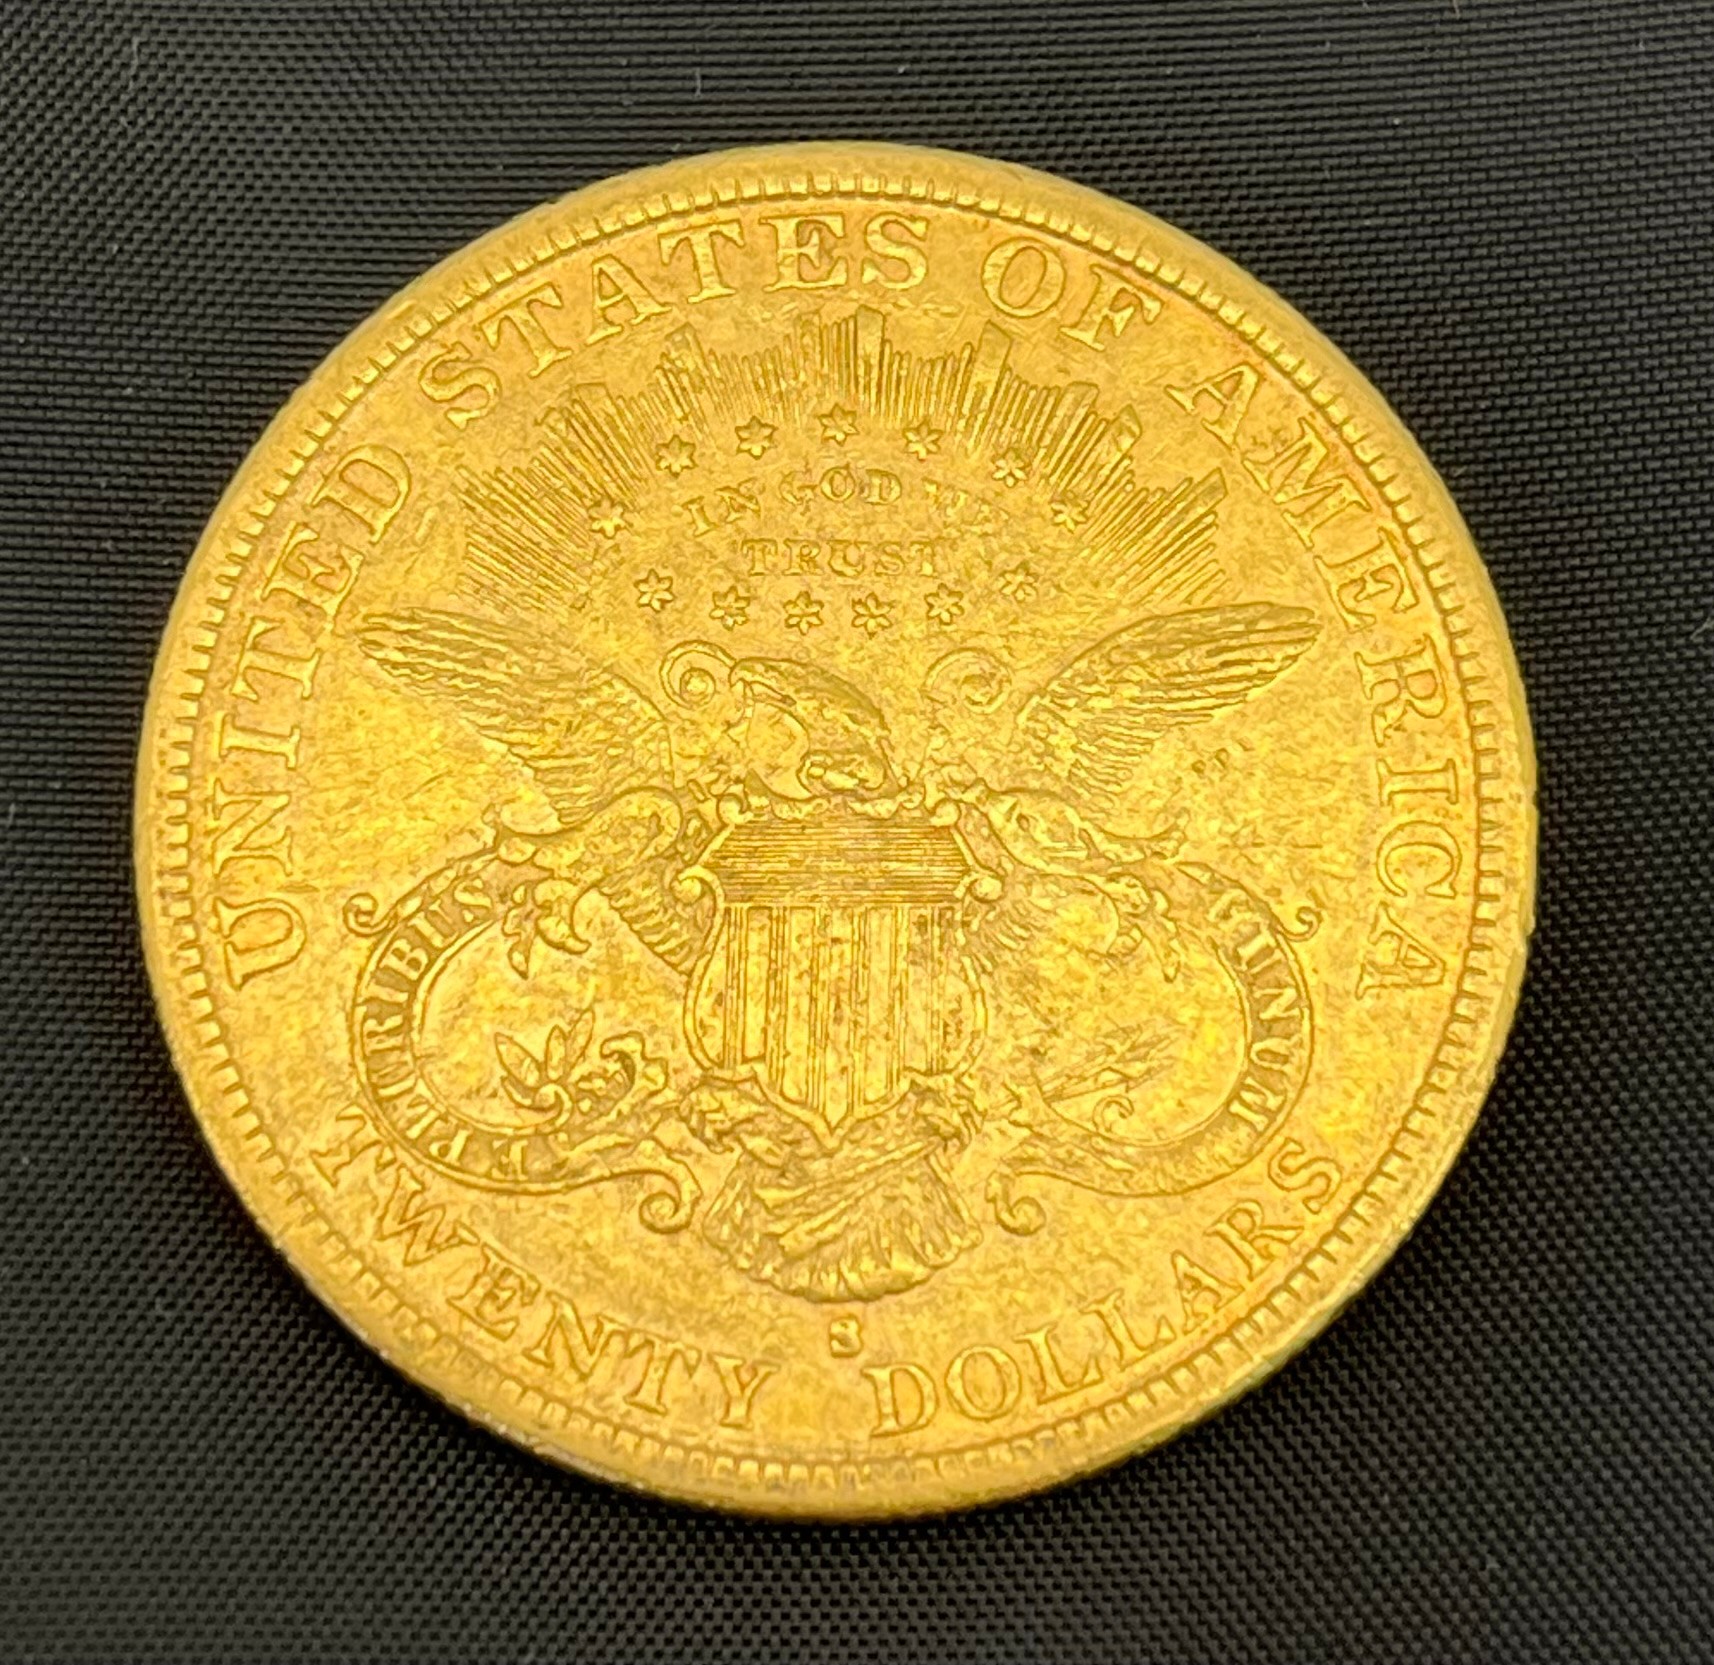 1881 Gold Liberty Double Eagle American Twenty Dollar coin. - Image 2 of 2